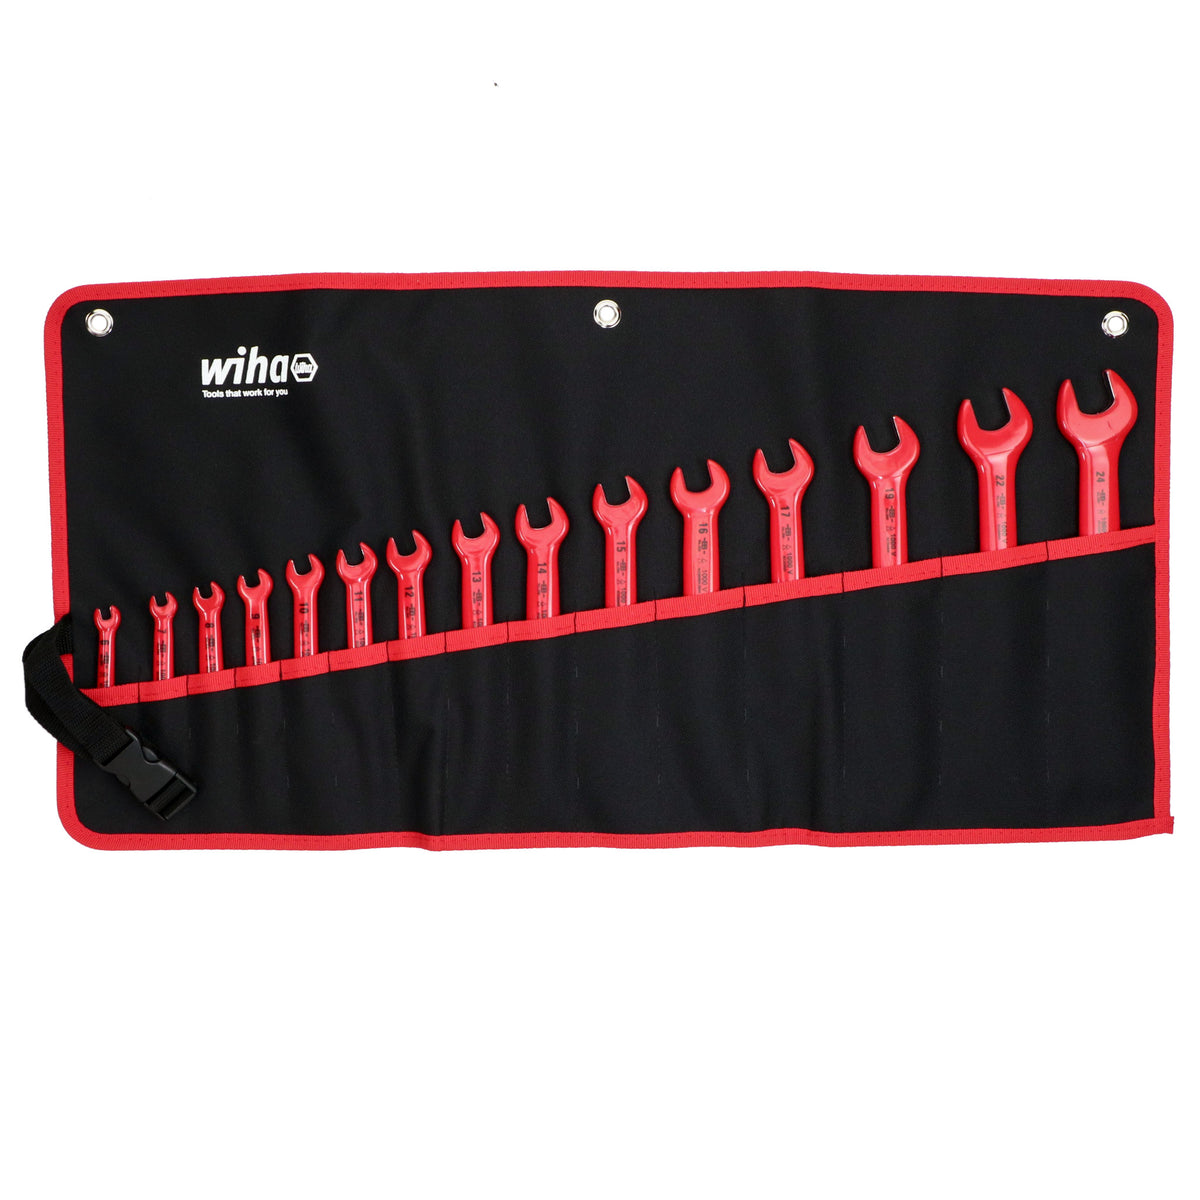 Wiha 20091 15 Piece Insulated Open End Wrench Set - Metric